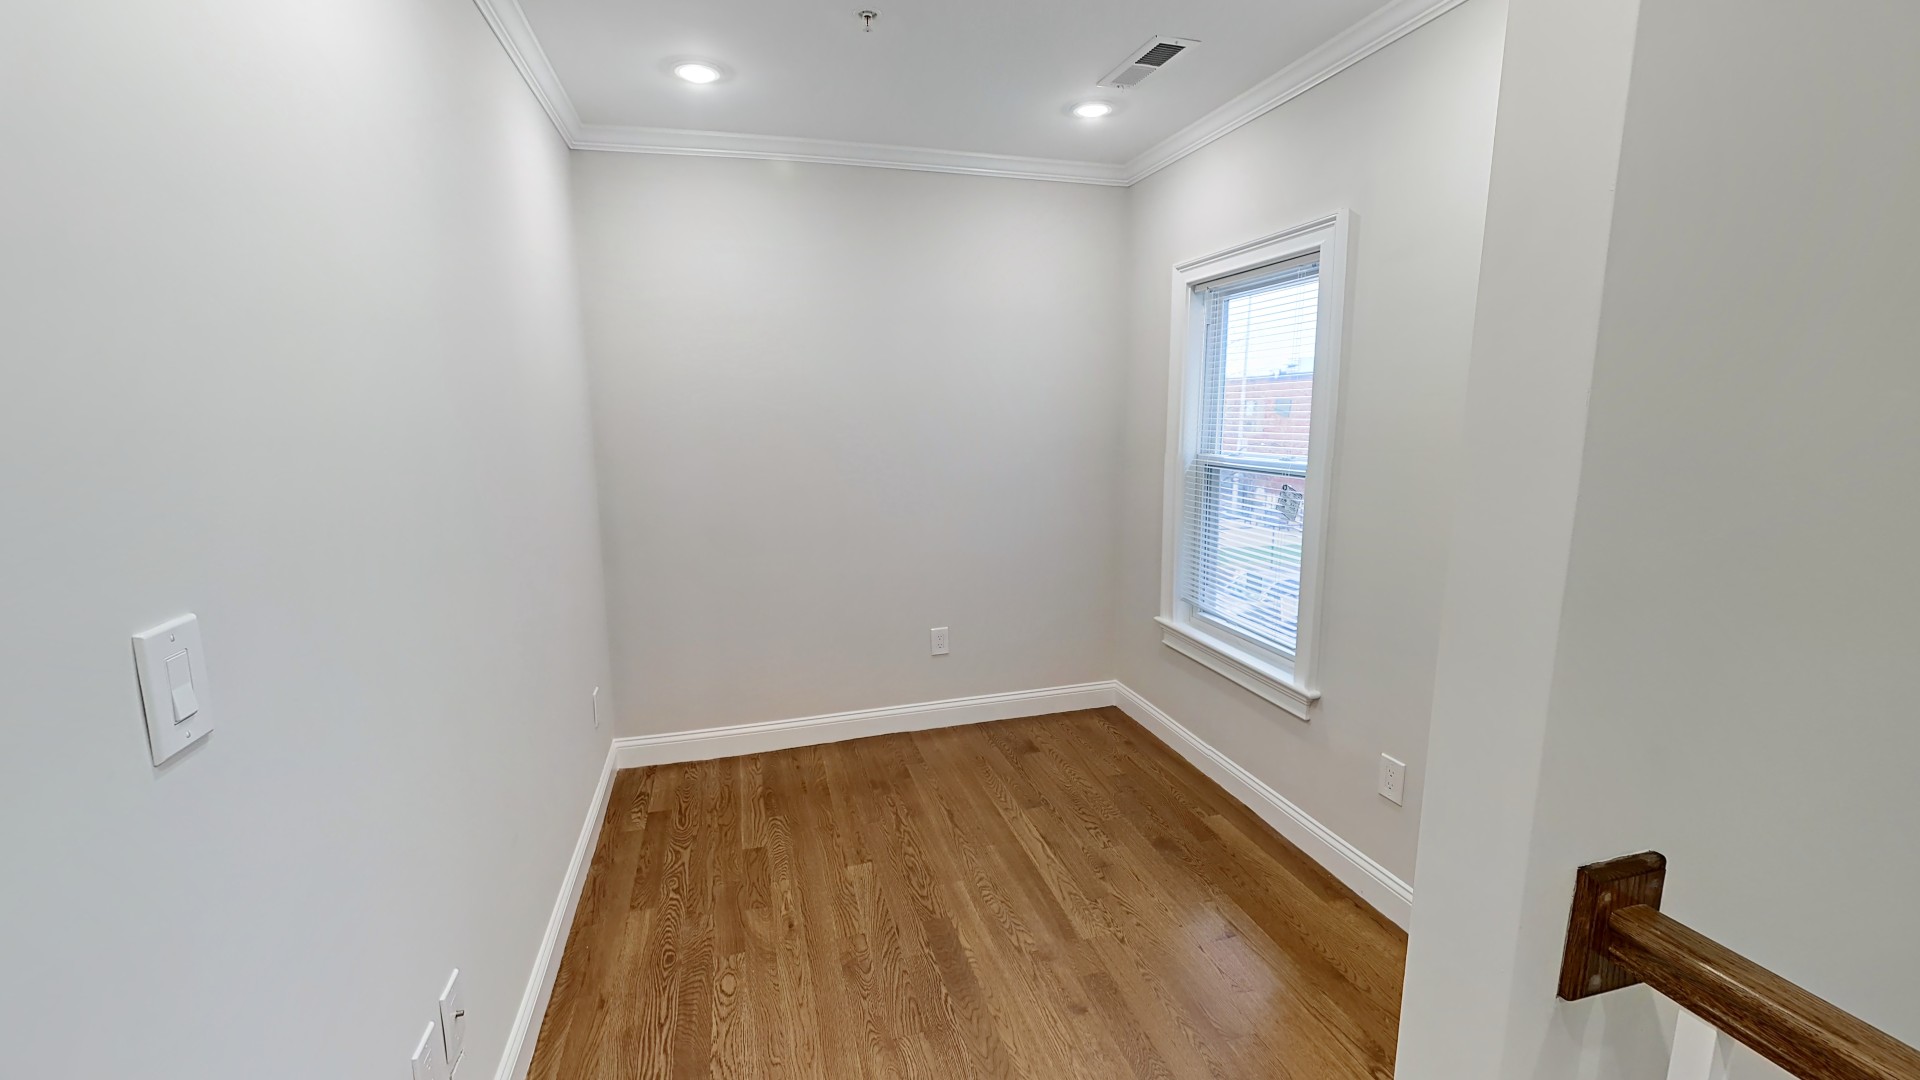 Photos of apartment on Pearl St.,Somerville MA 02145